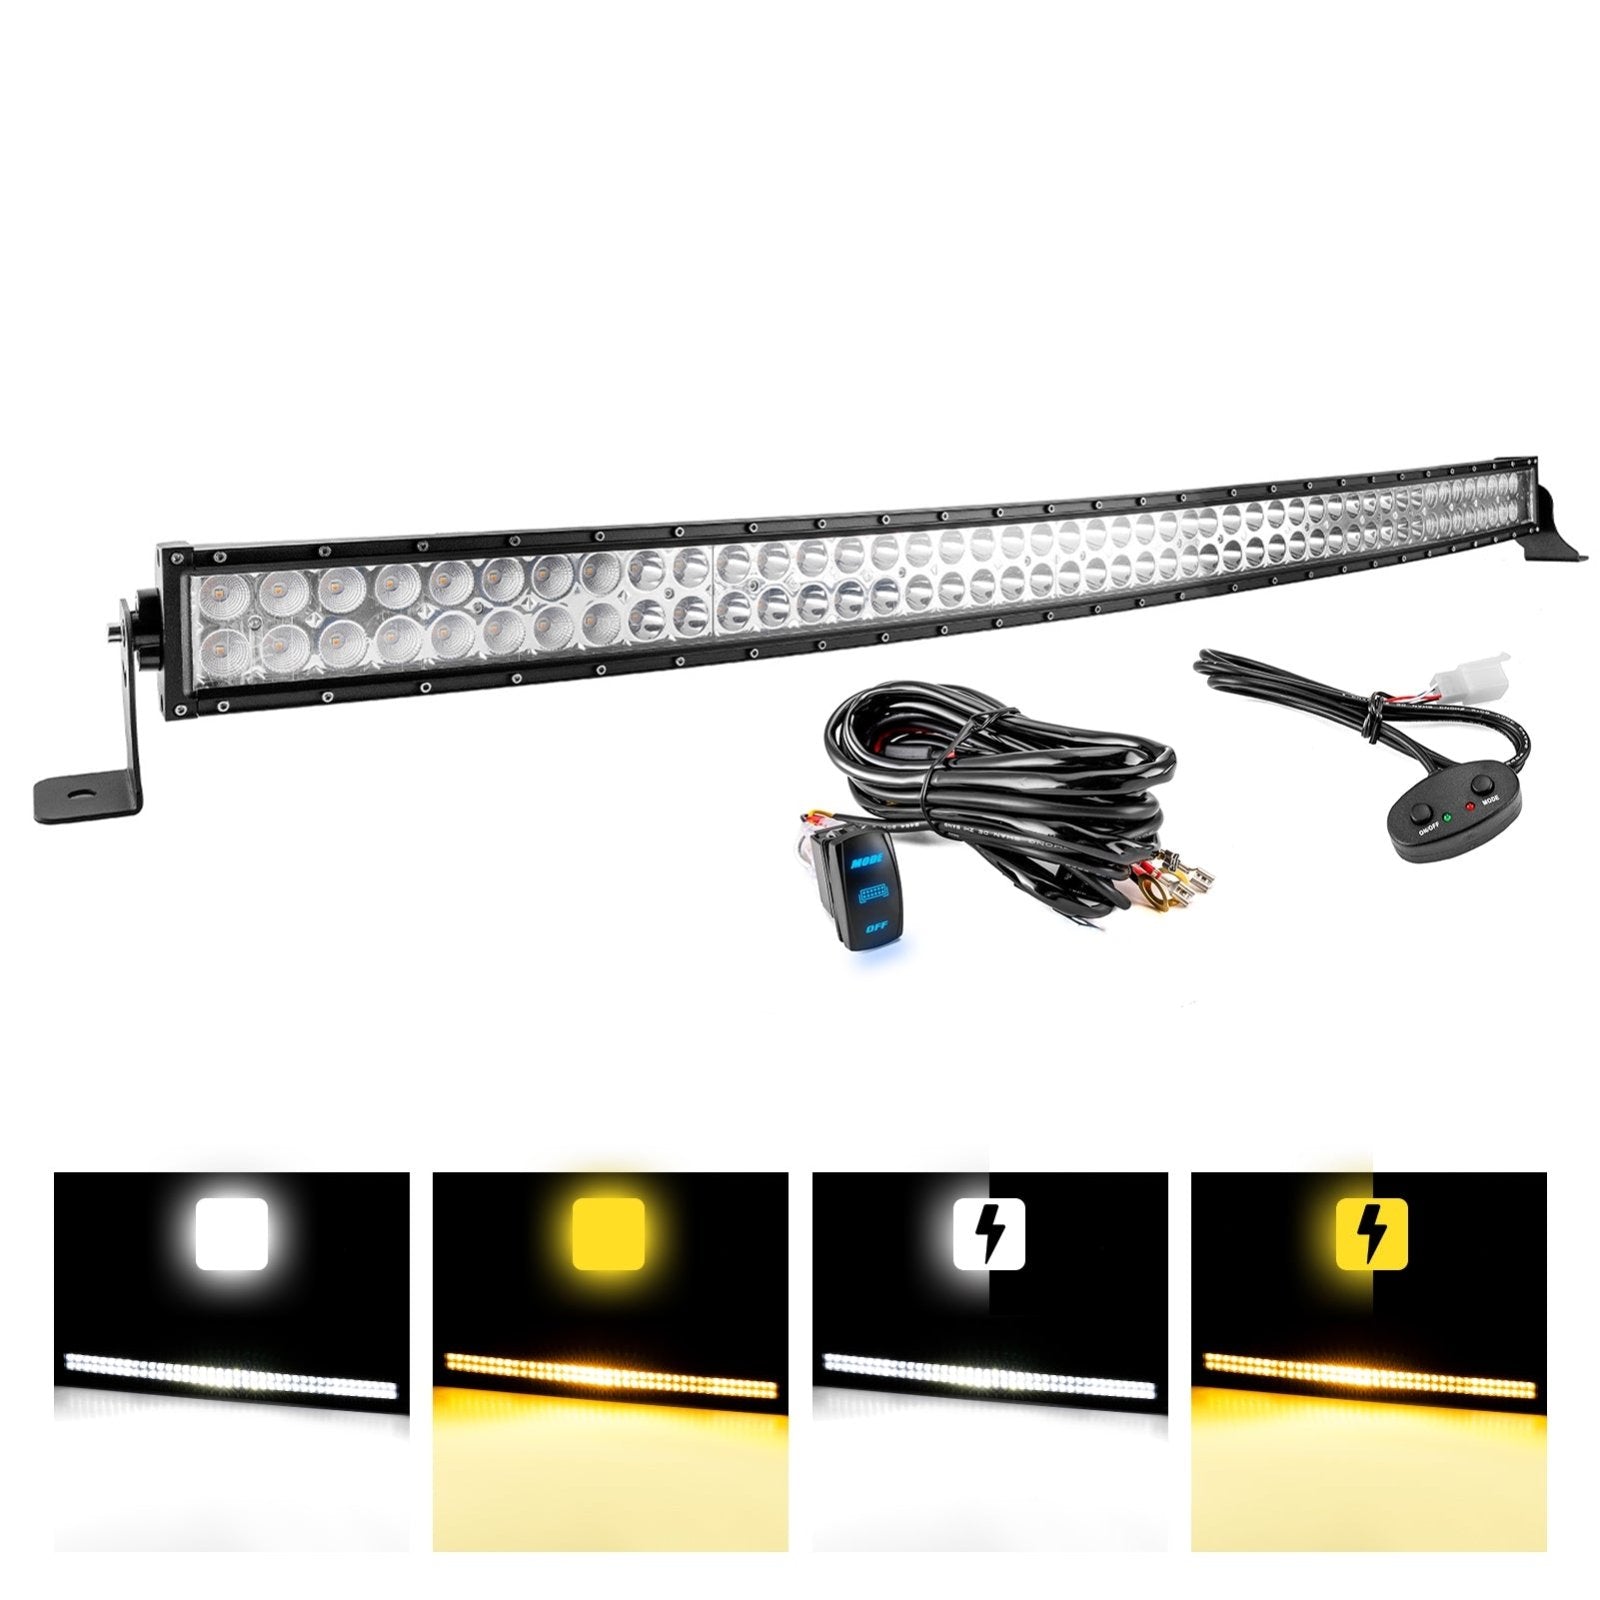 Chevy Toyota Dodge Ram 300W 52" Dual Rows Curved LED Light Bar W/ Wiring Harness Kit | Amber White & Strobe Modes - Weisen